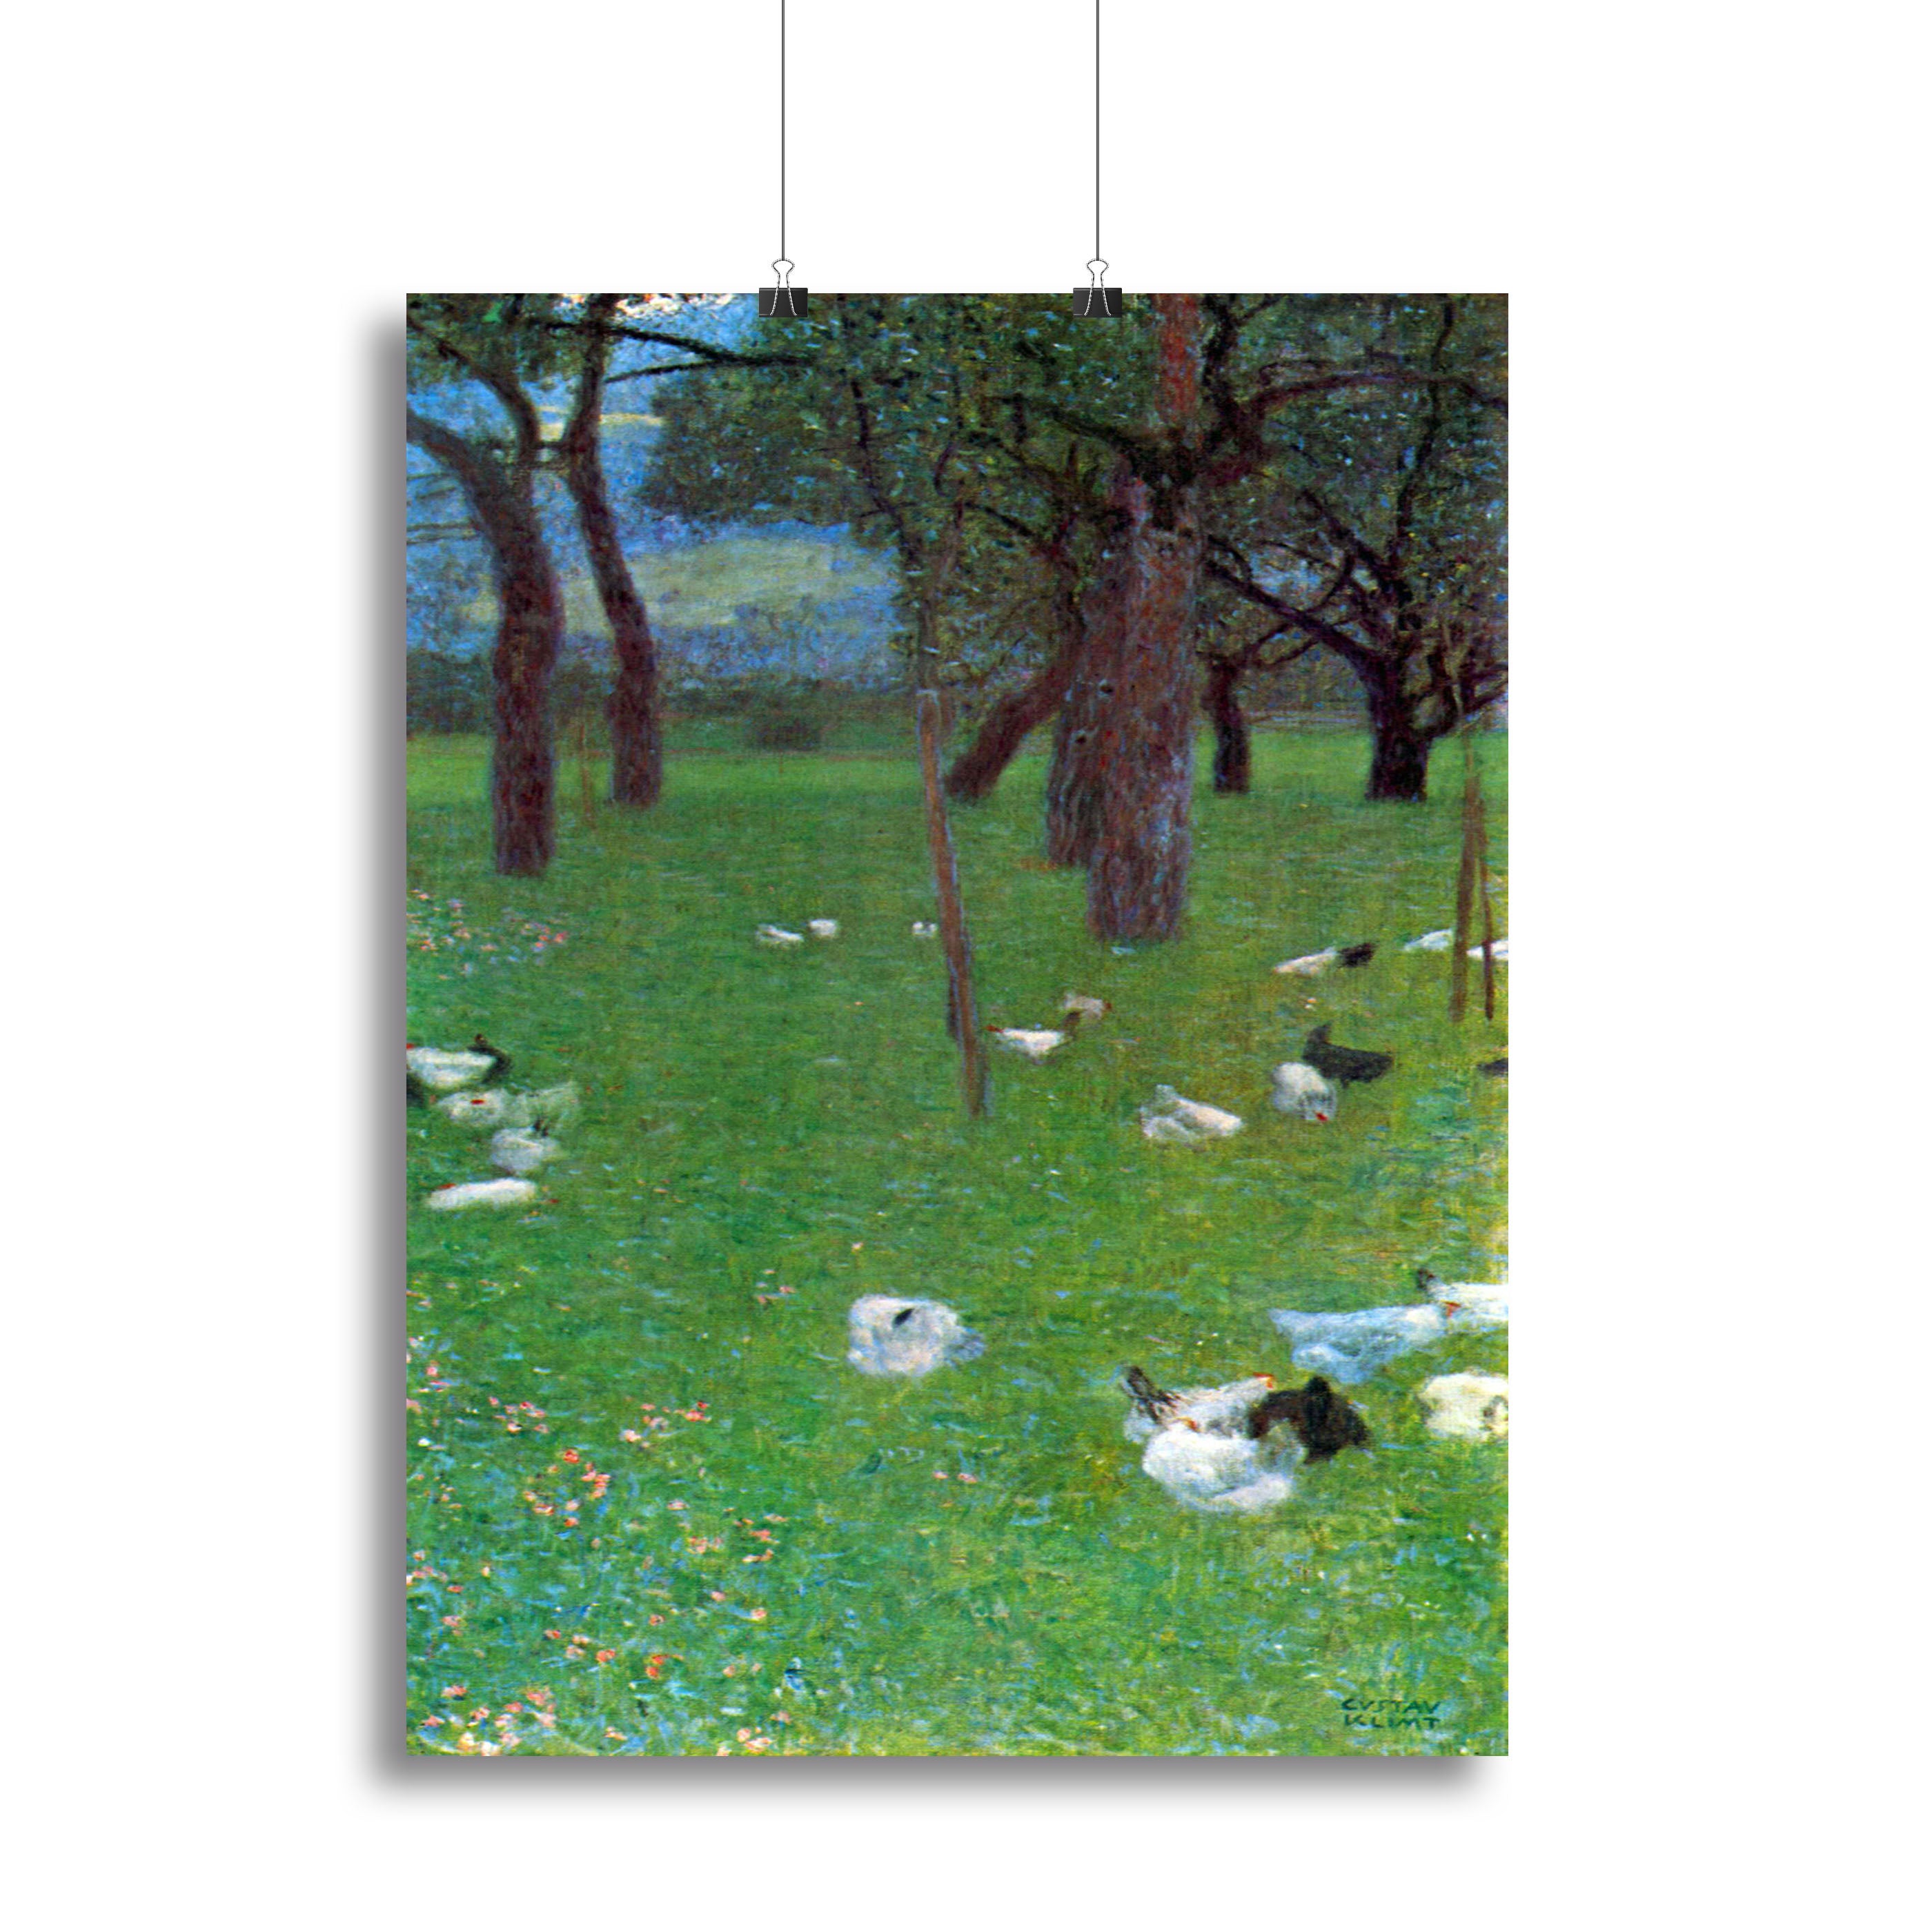 After the rain garden with chickens in St. Agatha by Klimt Canvas Print or Poster - Canvas Art Rocks - 2